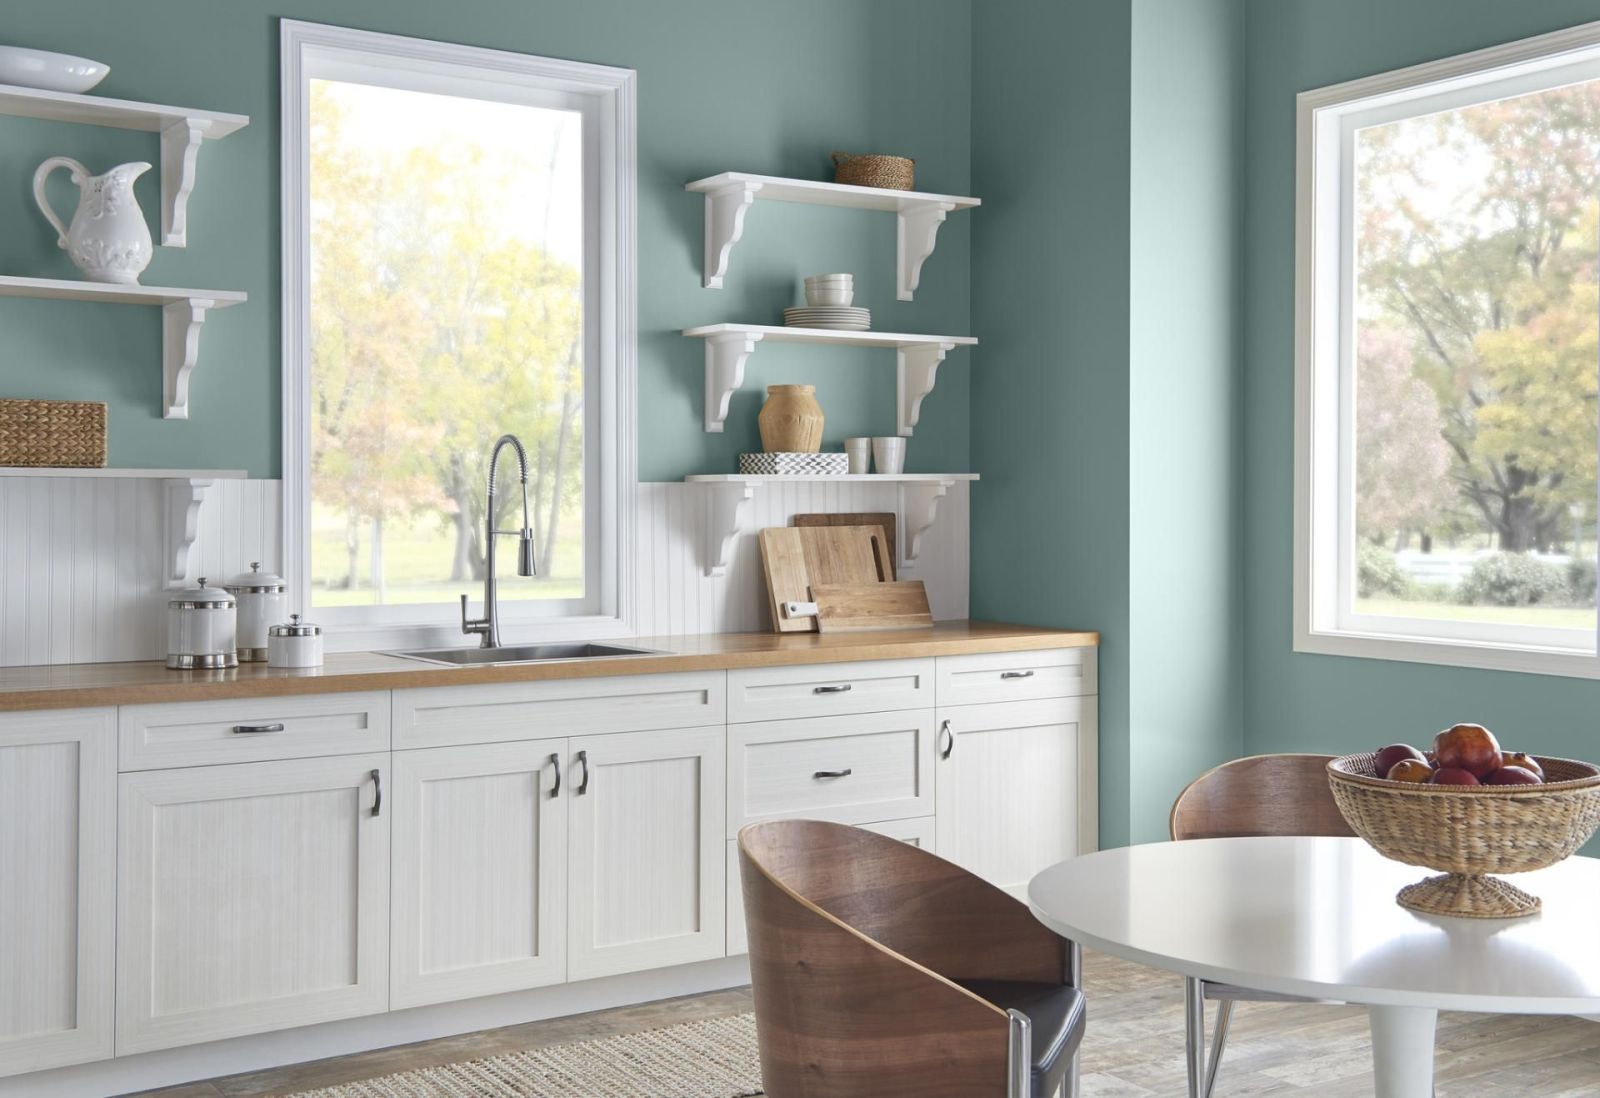 What paint to choose for the walls in the kitchen